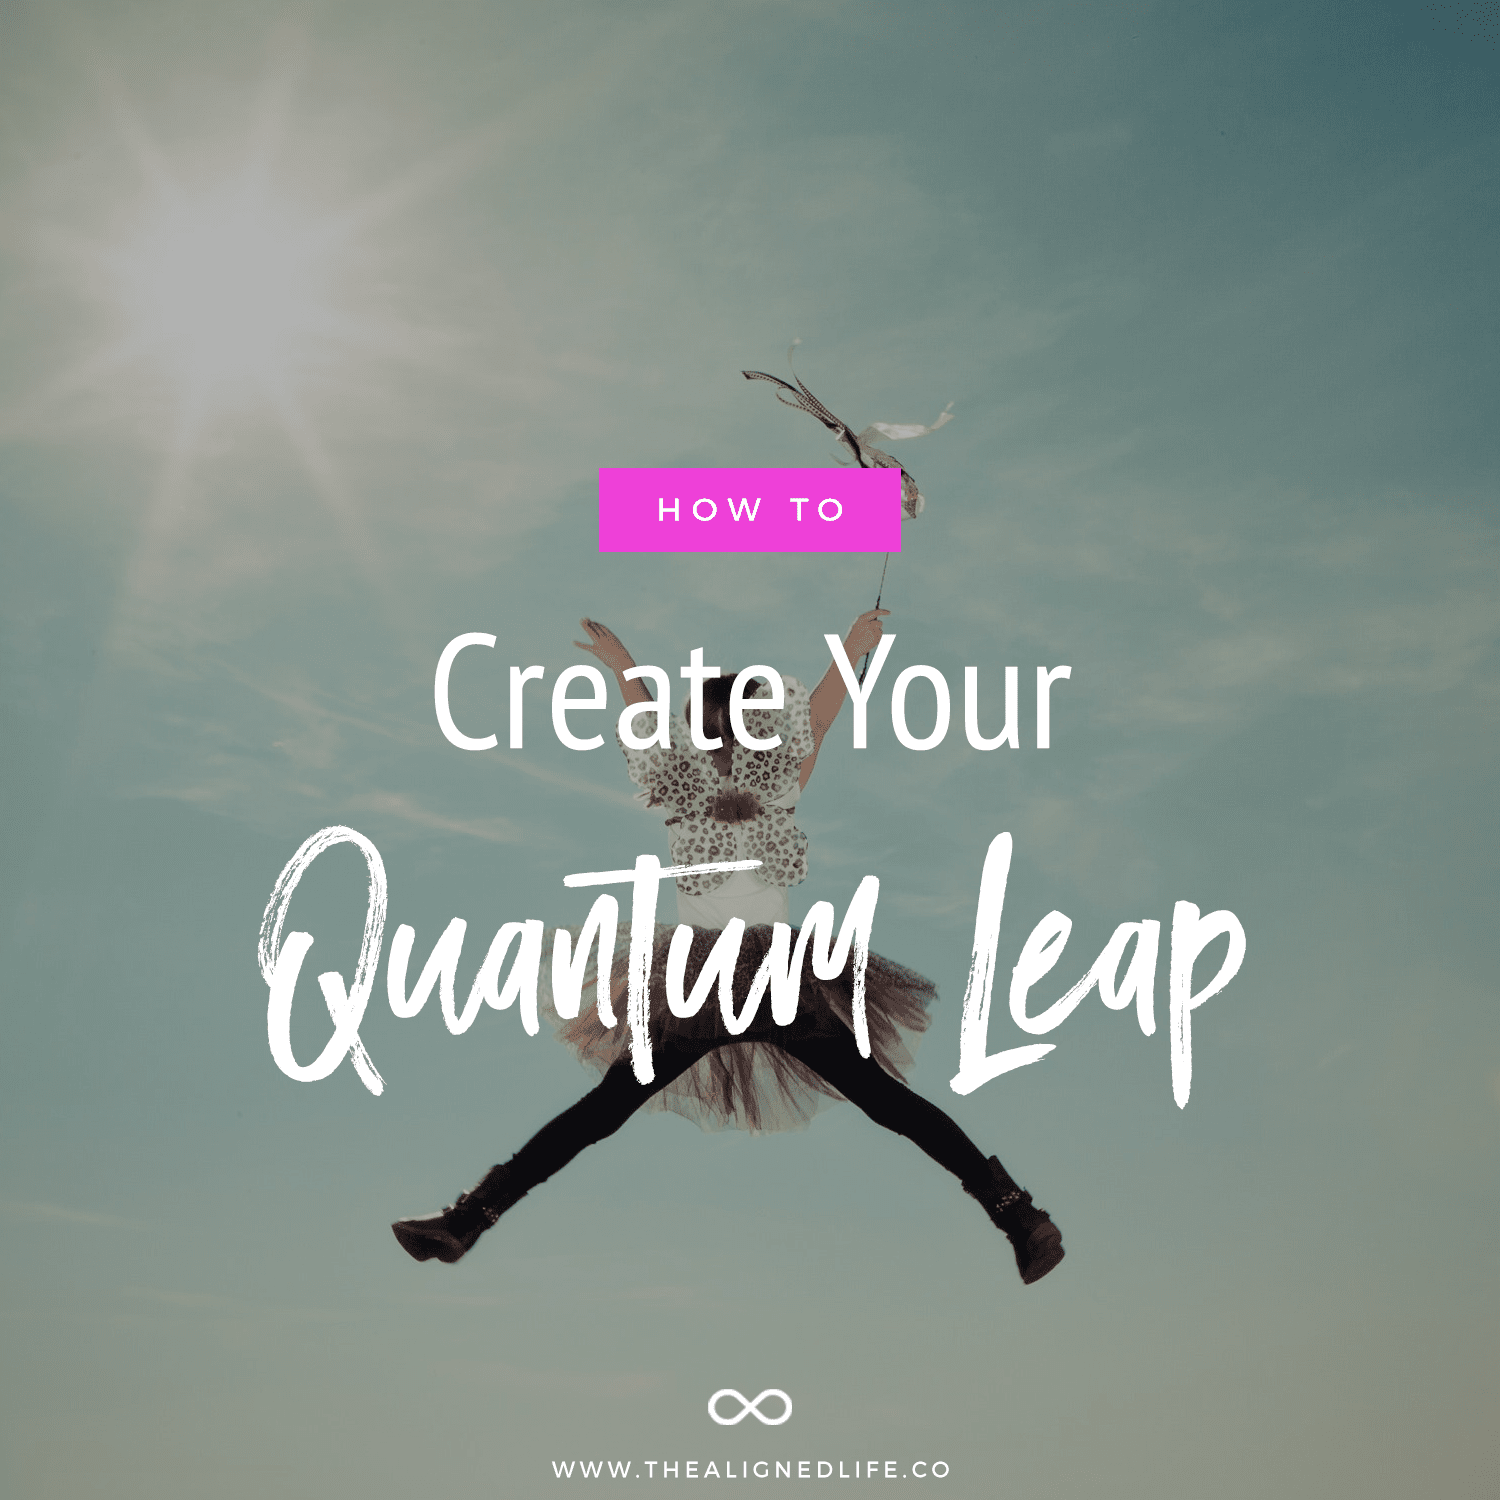 Get Ready To Jump! How To Experience A Quantum Leap